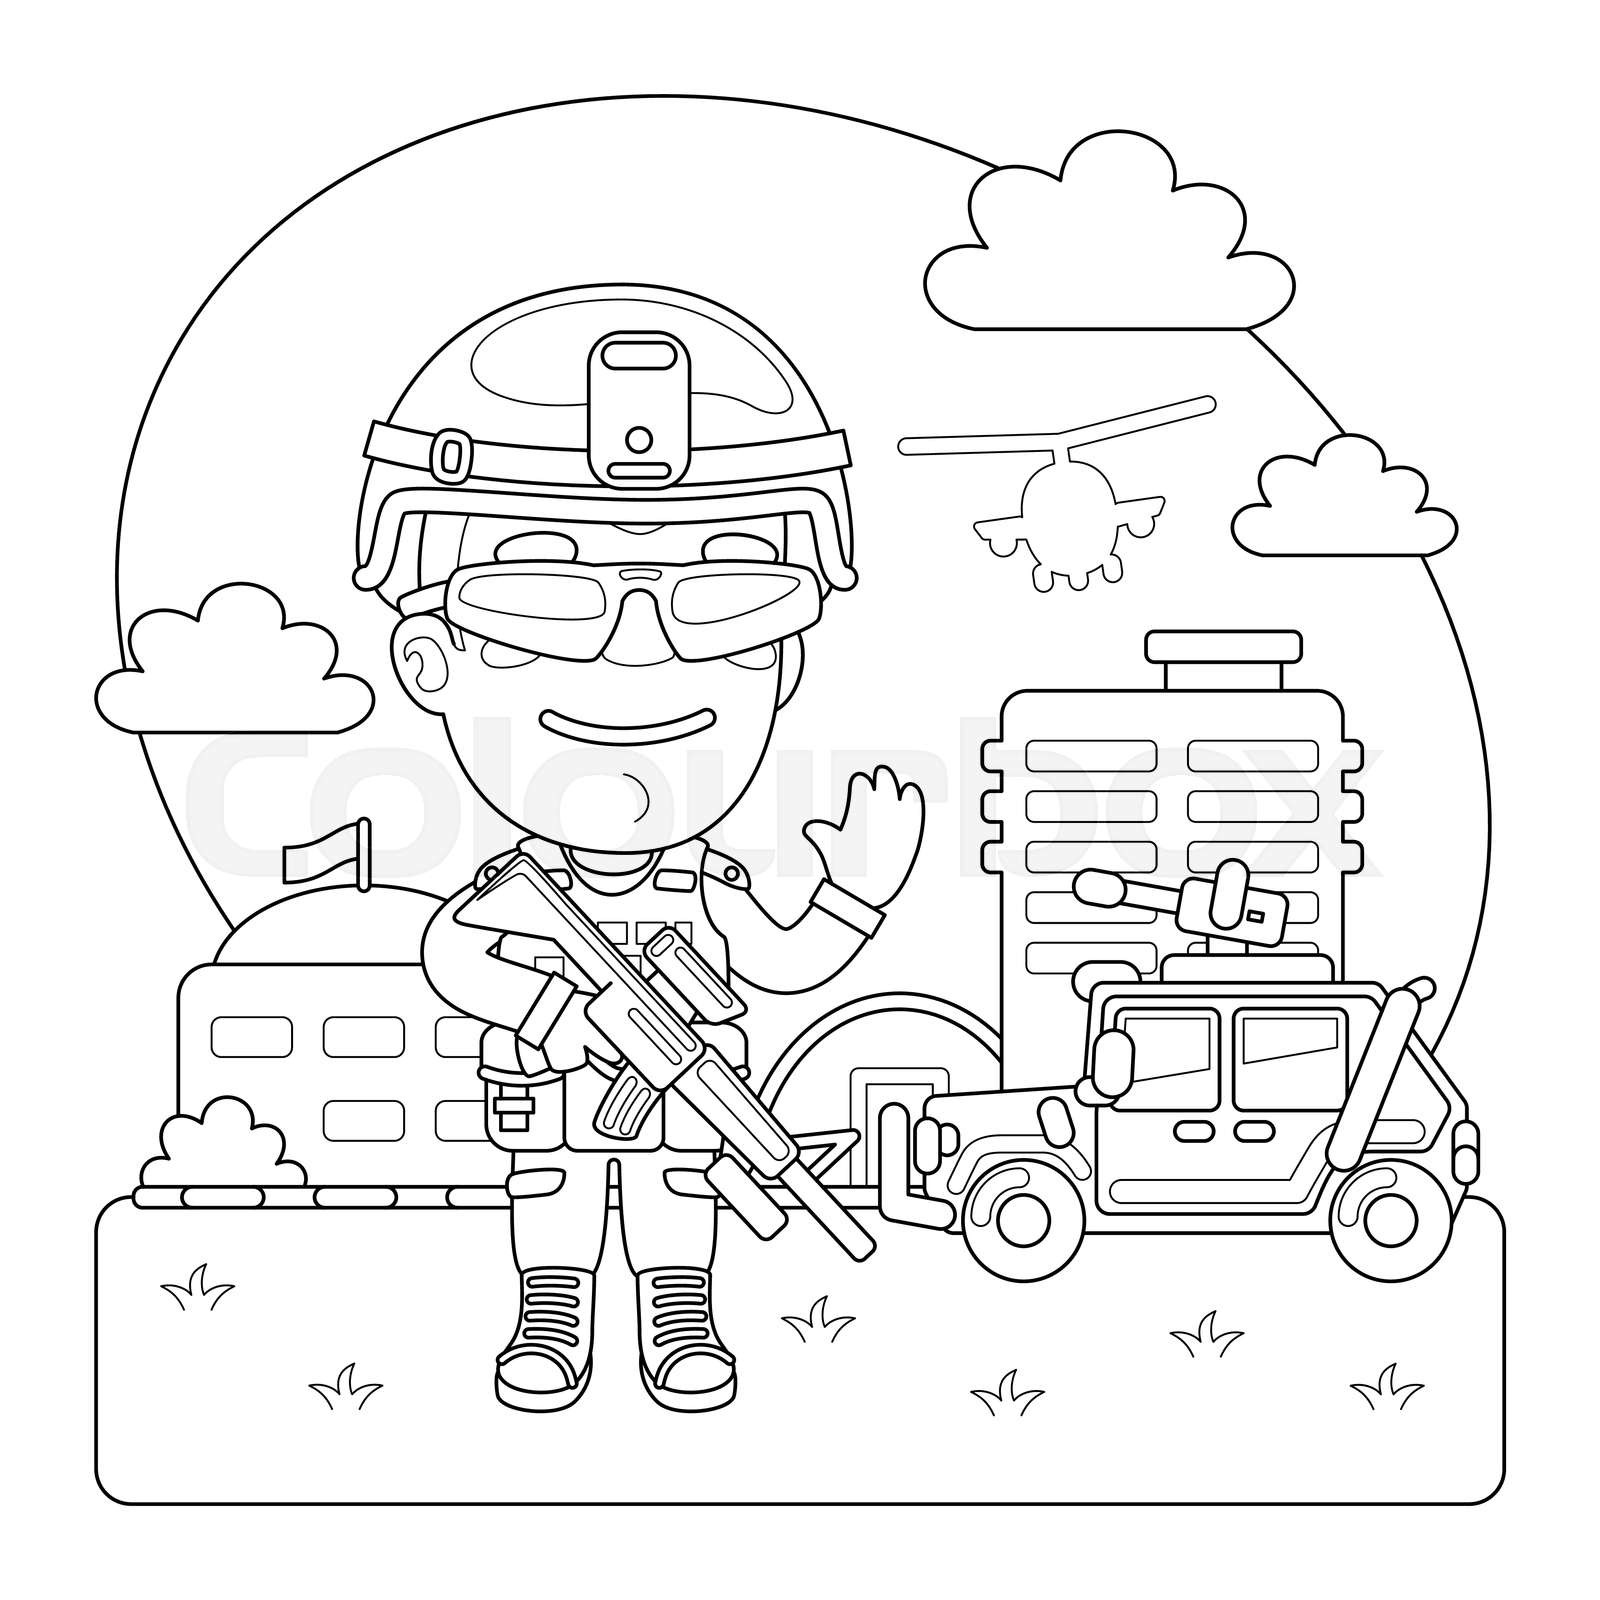 Soldier coloring page stock vector